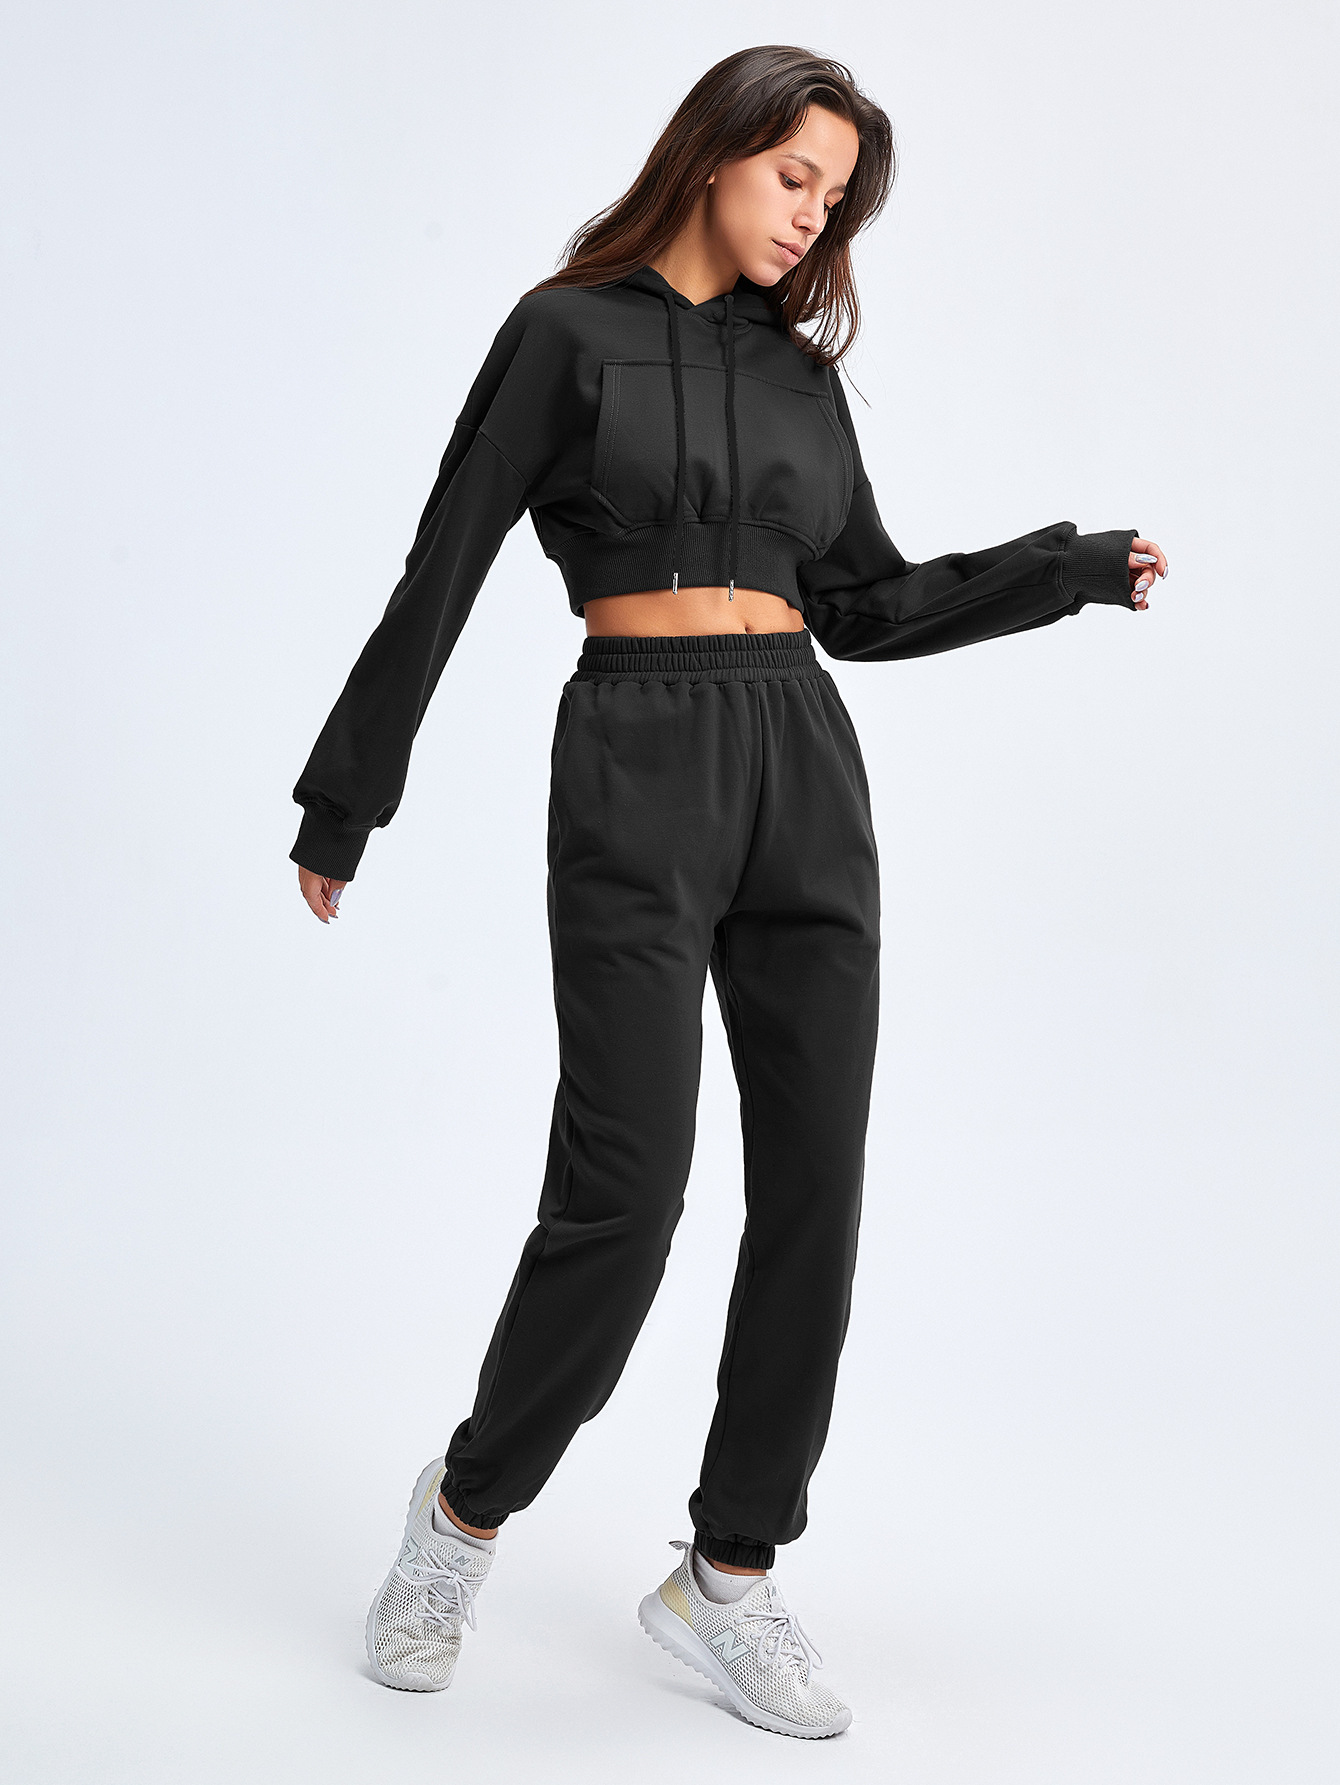 Sporty Womens Tracksuit Set With Black Cropped Hoodie And Sweatpants Crop  Top And Jogger Outfits For Casual Wear From Appletree_, $18.49